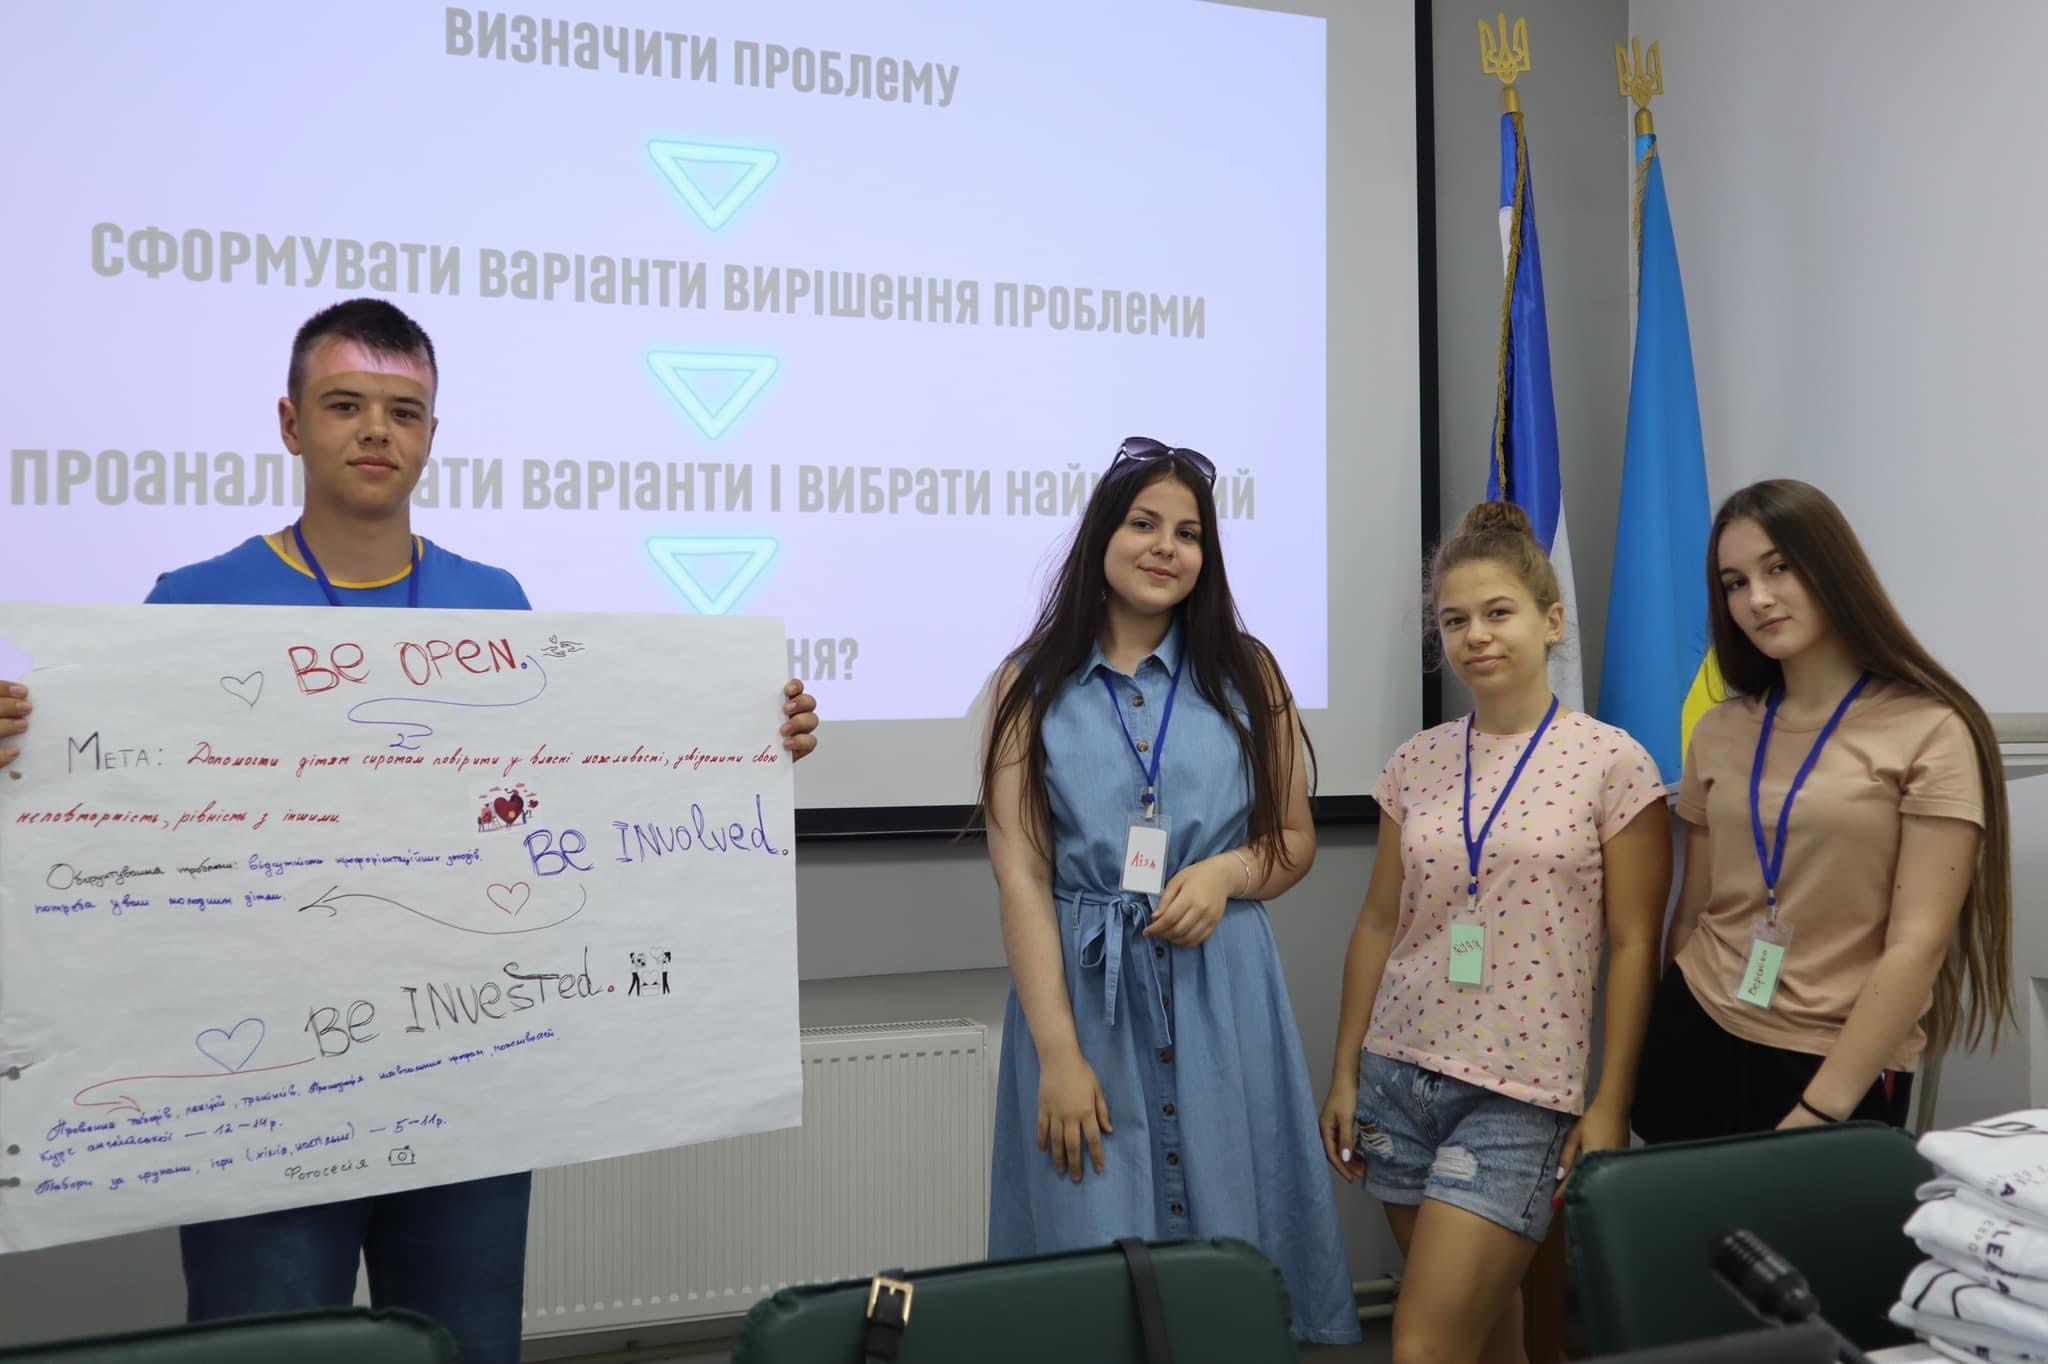 With the support of U-LEAD, a volunteering movement is growing in the municipality in the Ternopil region